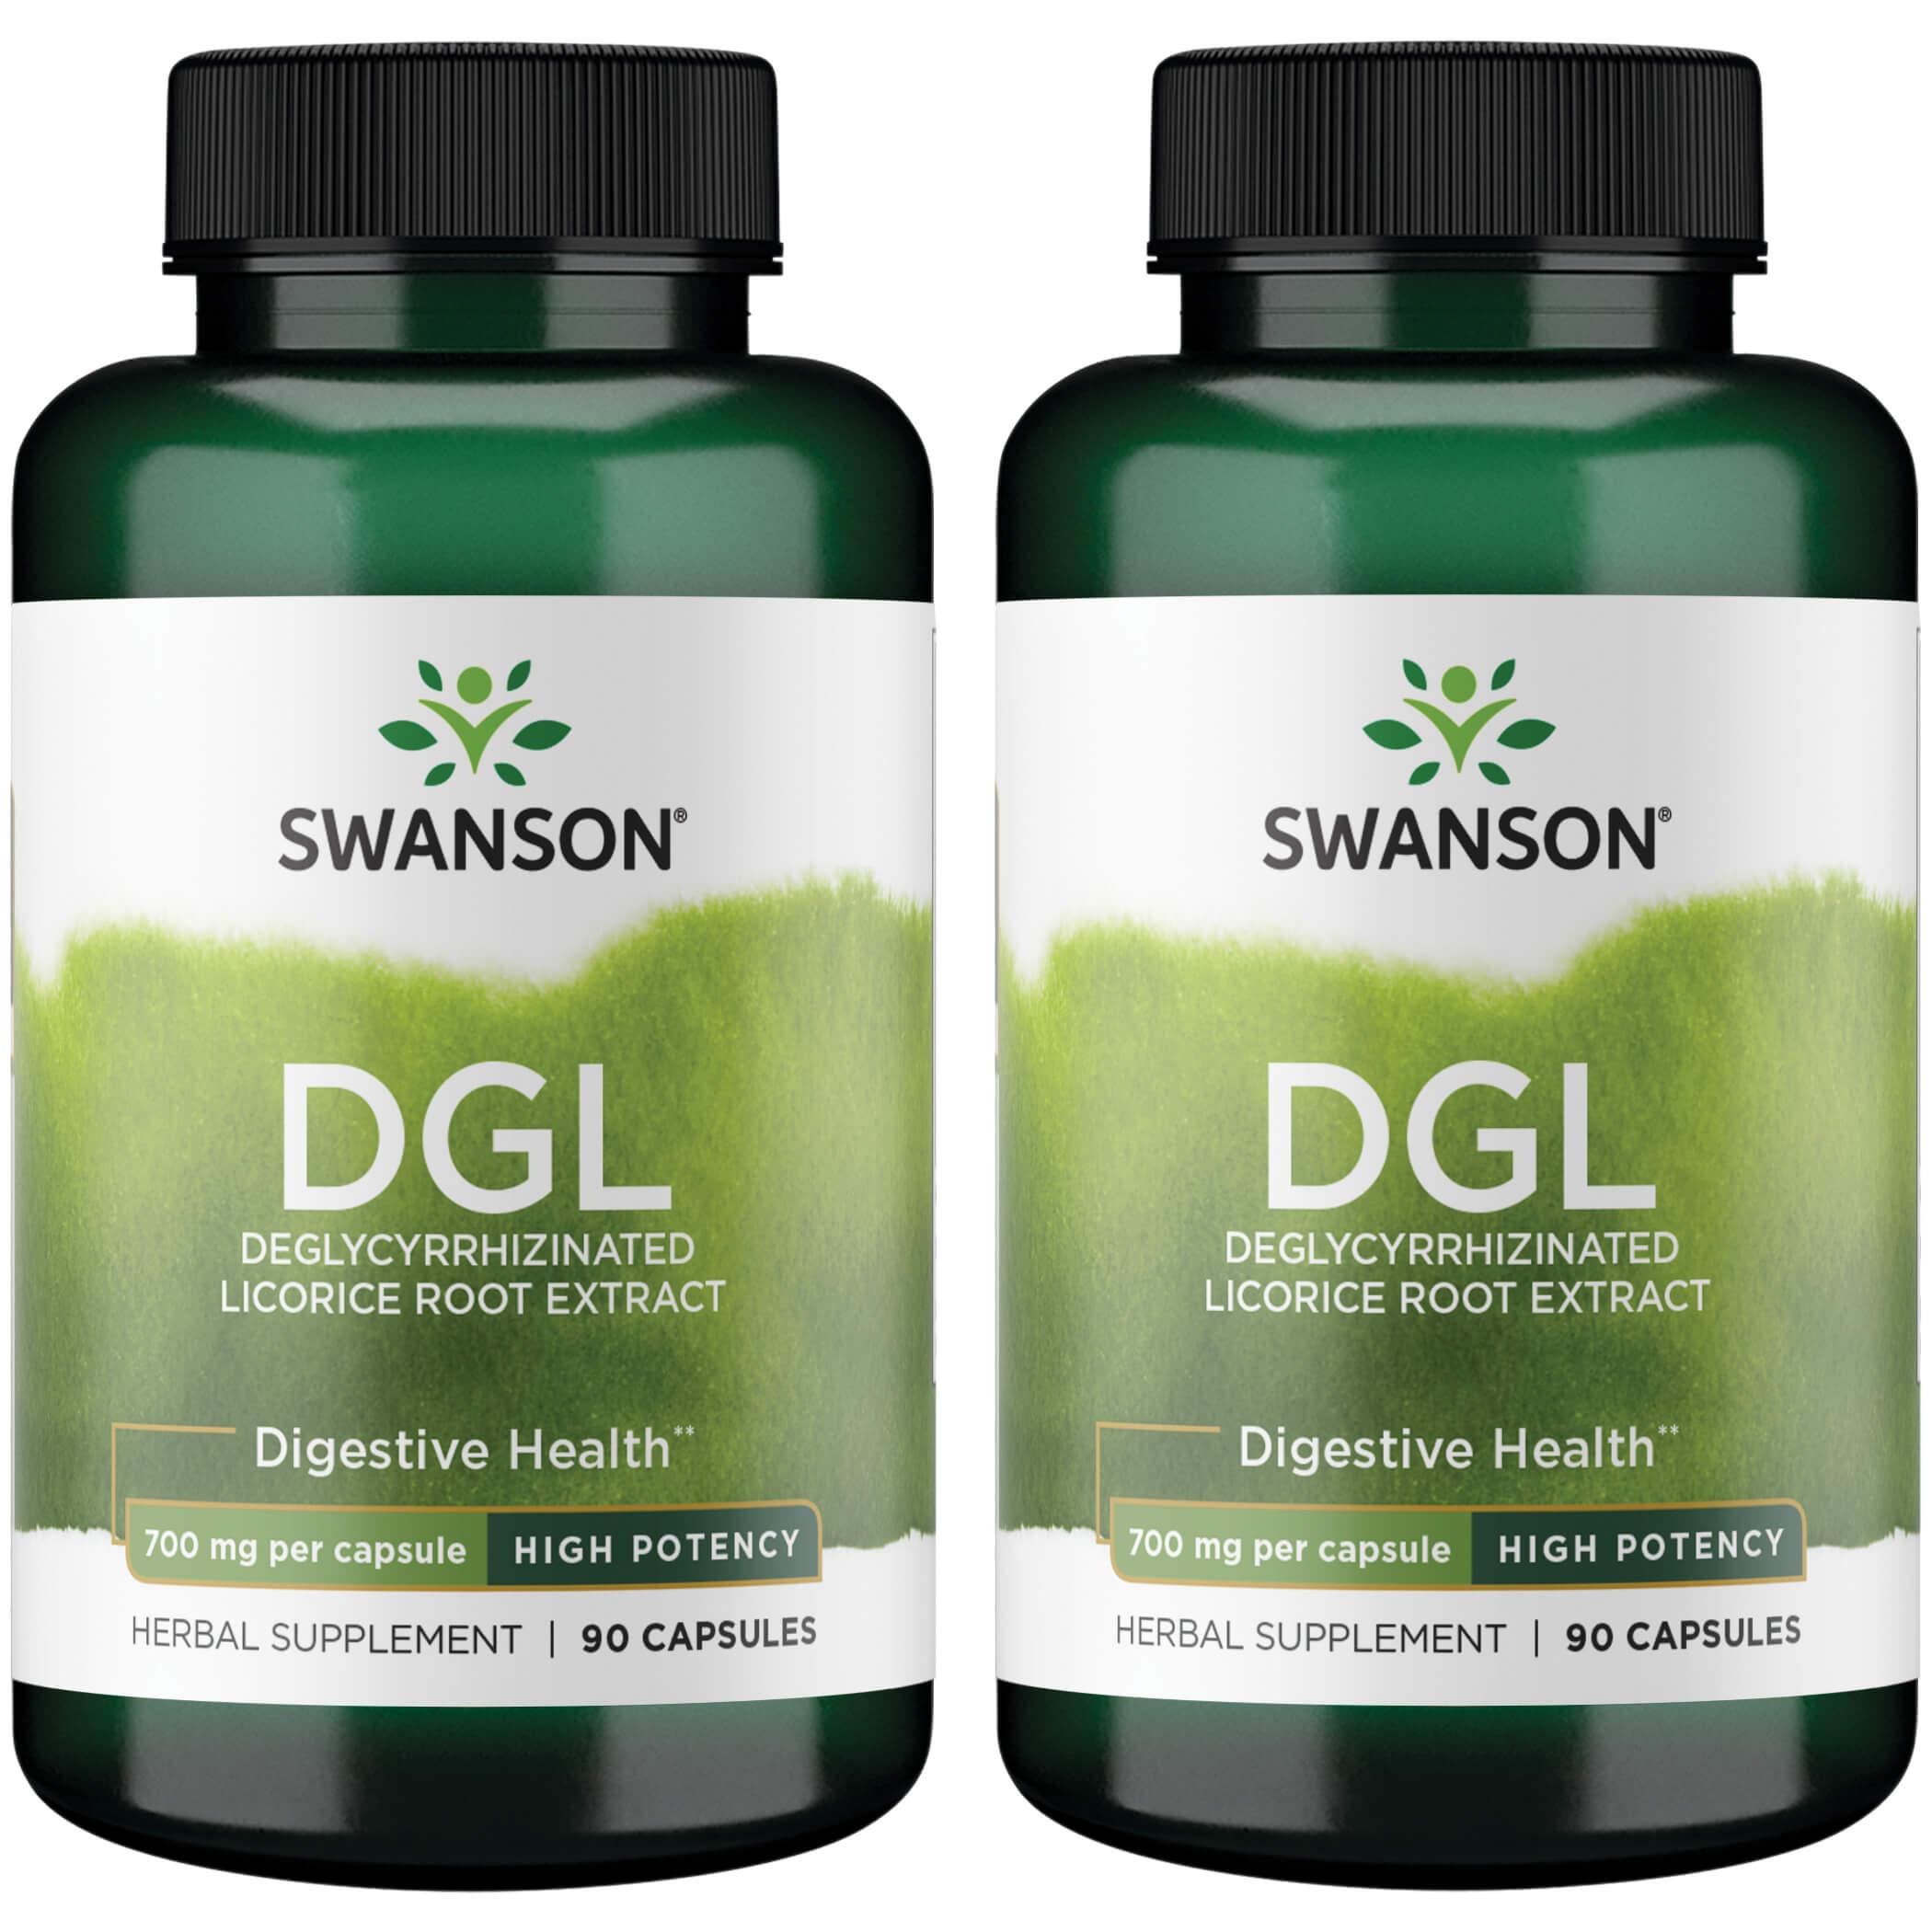 Swanson Superior Herbs Dgl Deglycyrrhizinated Licorice Root Extract - High Potency 2 Pack Vitamin 700 mg 90 Caps